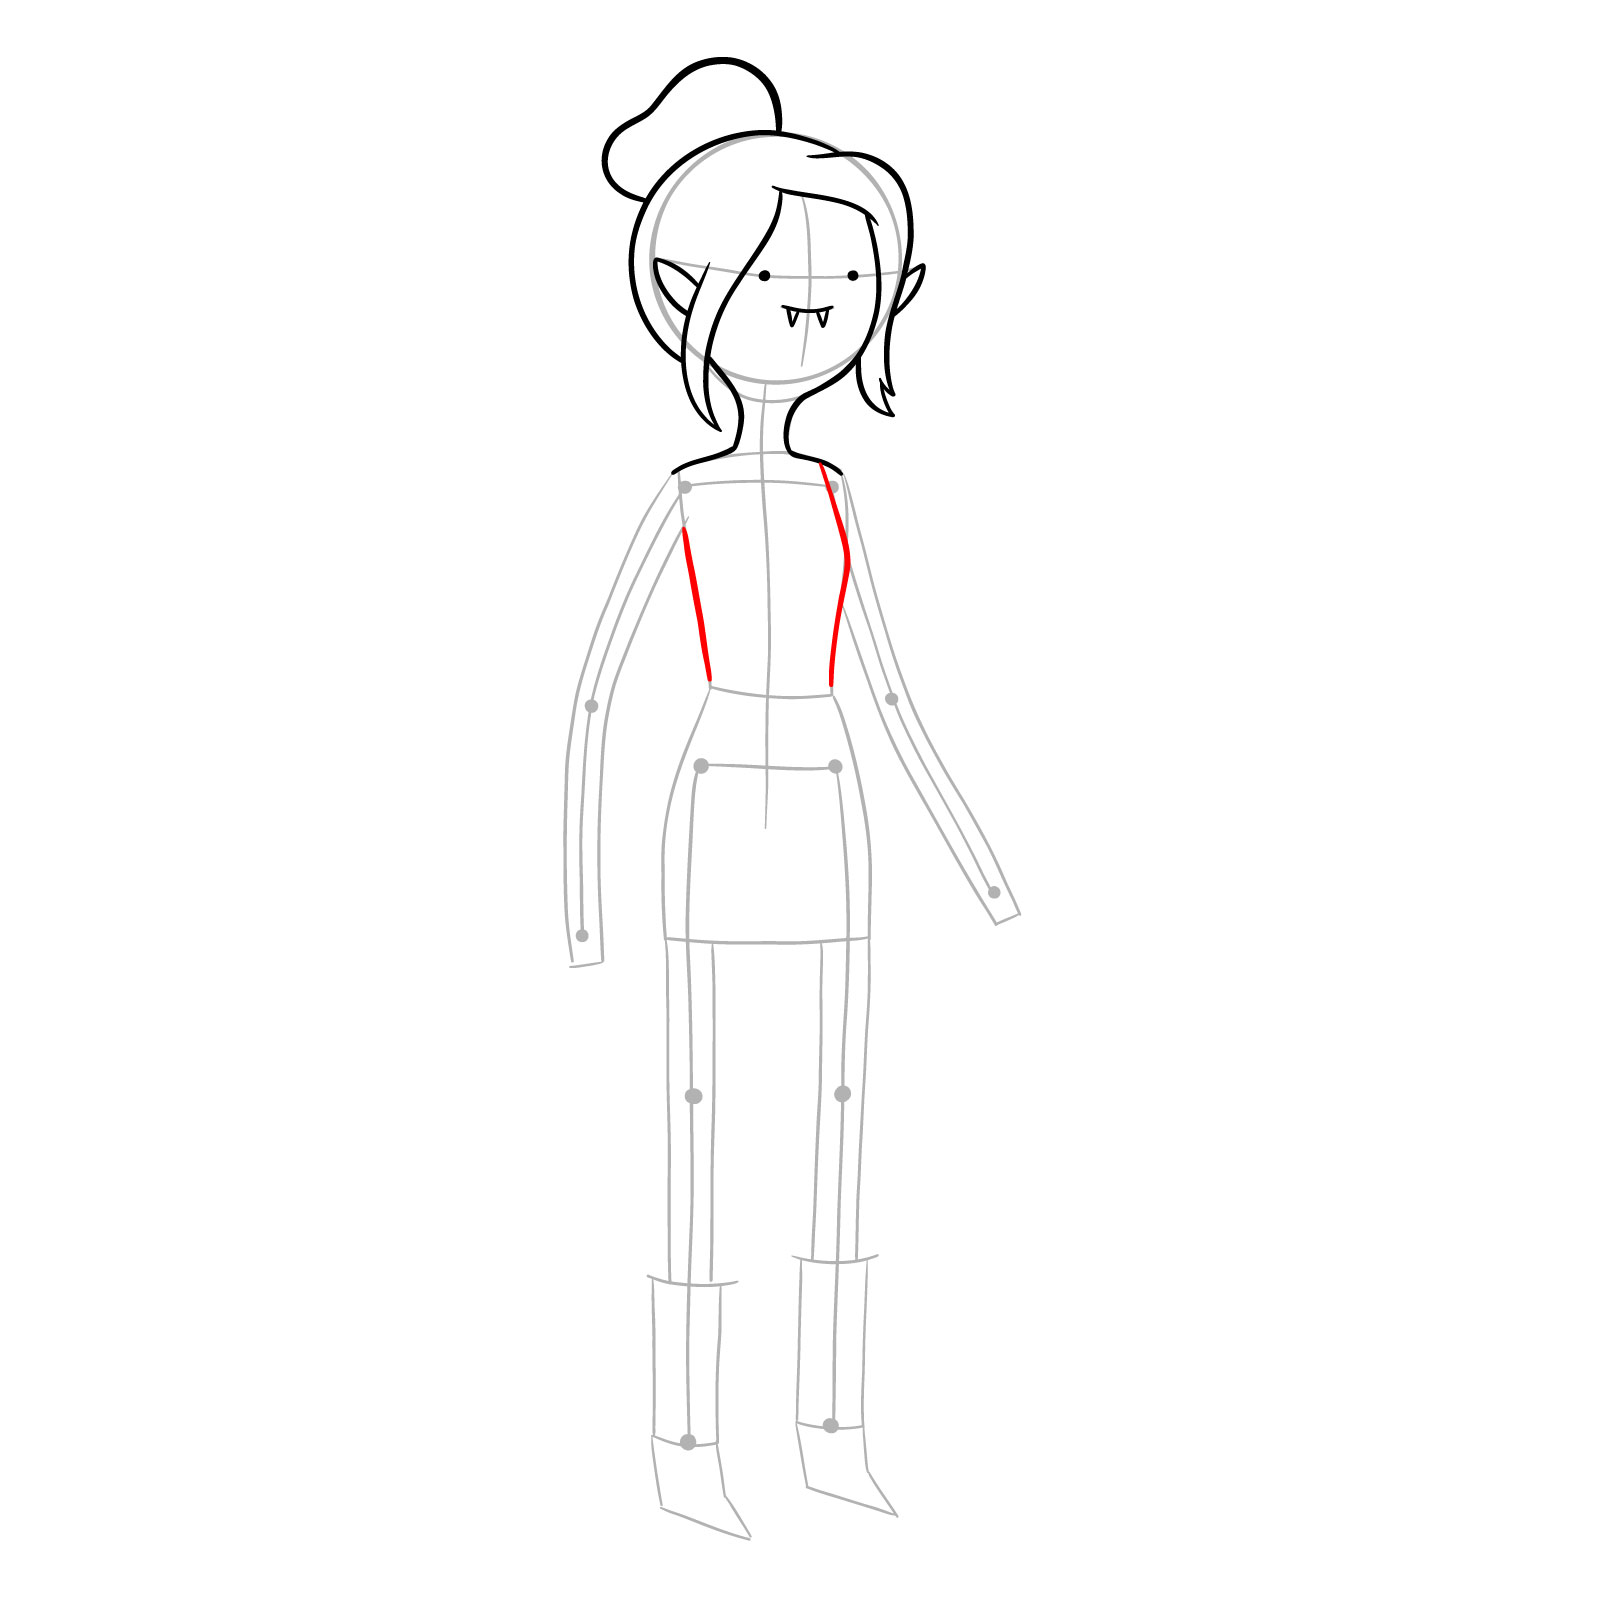 How to draw Marceline from Broke His Crown episode - step 13